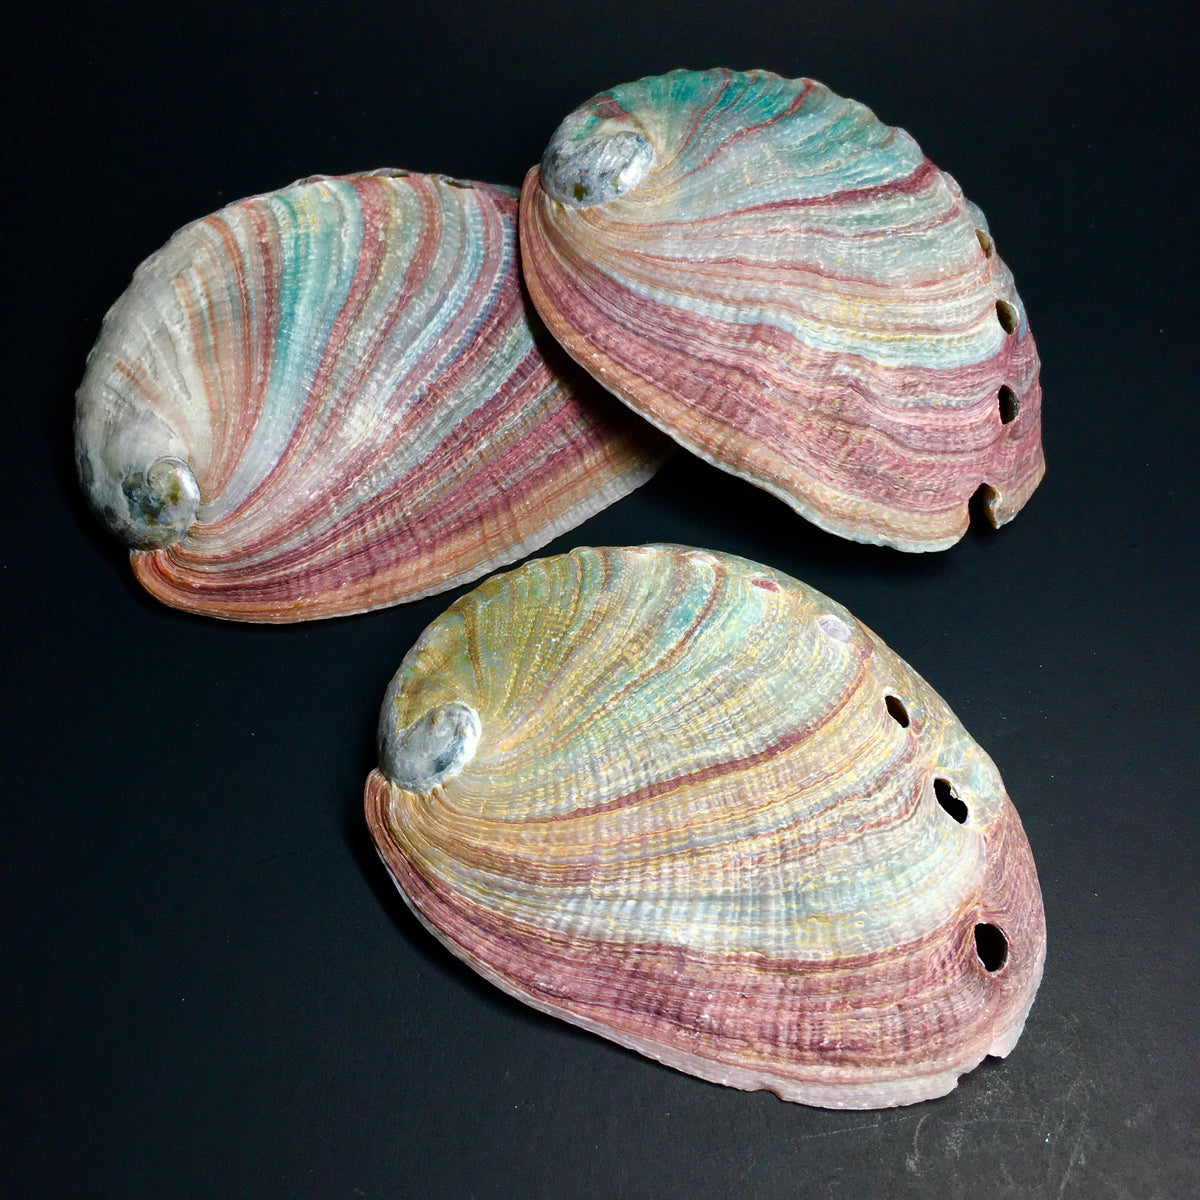 Abalone Shells variety, best pricing and quality